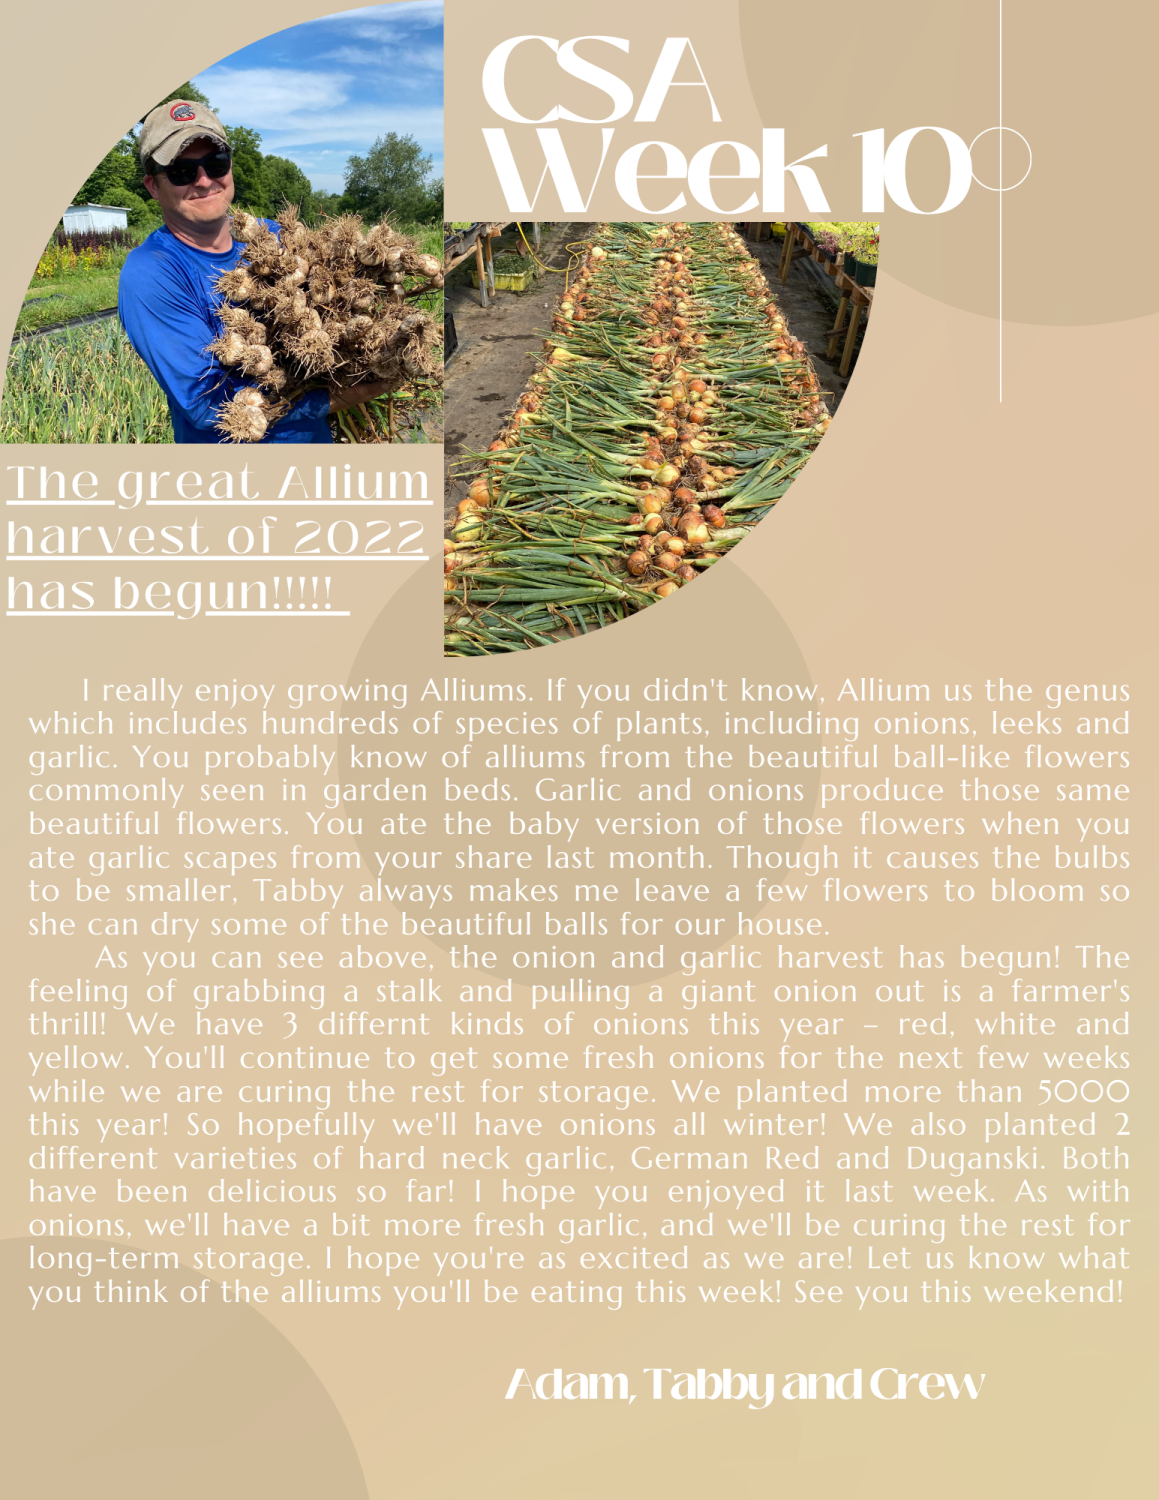 Previous Happening: Farm Happenings for July 8, 2022